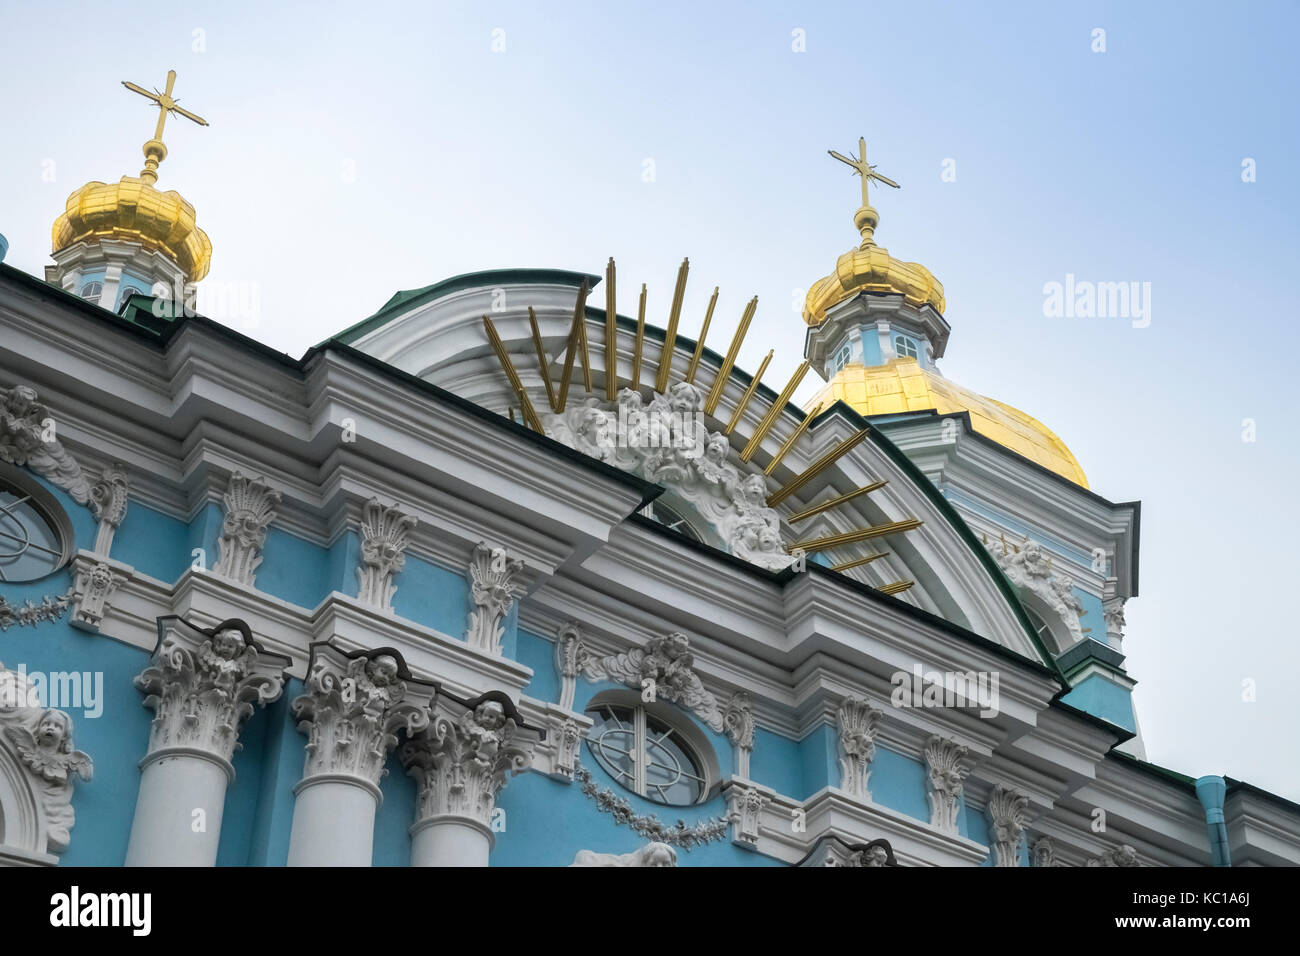 Close up architectural detail of Saint Nicholas Maritime Cathedral (known locally as Sailors' Cathedral), Saint Petersburg, Russia Stock Photo